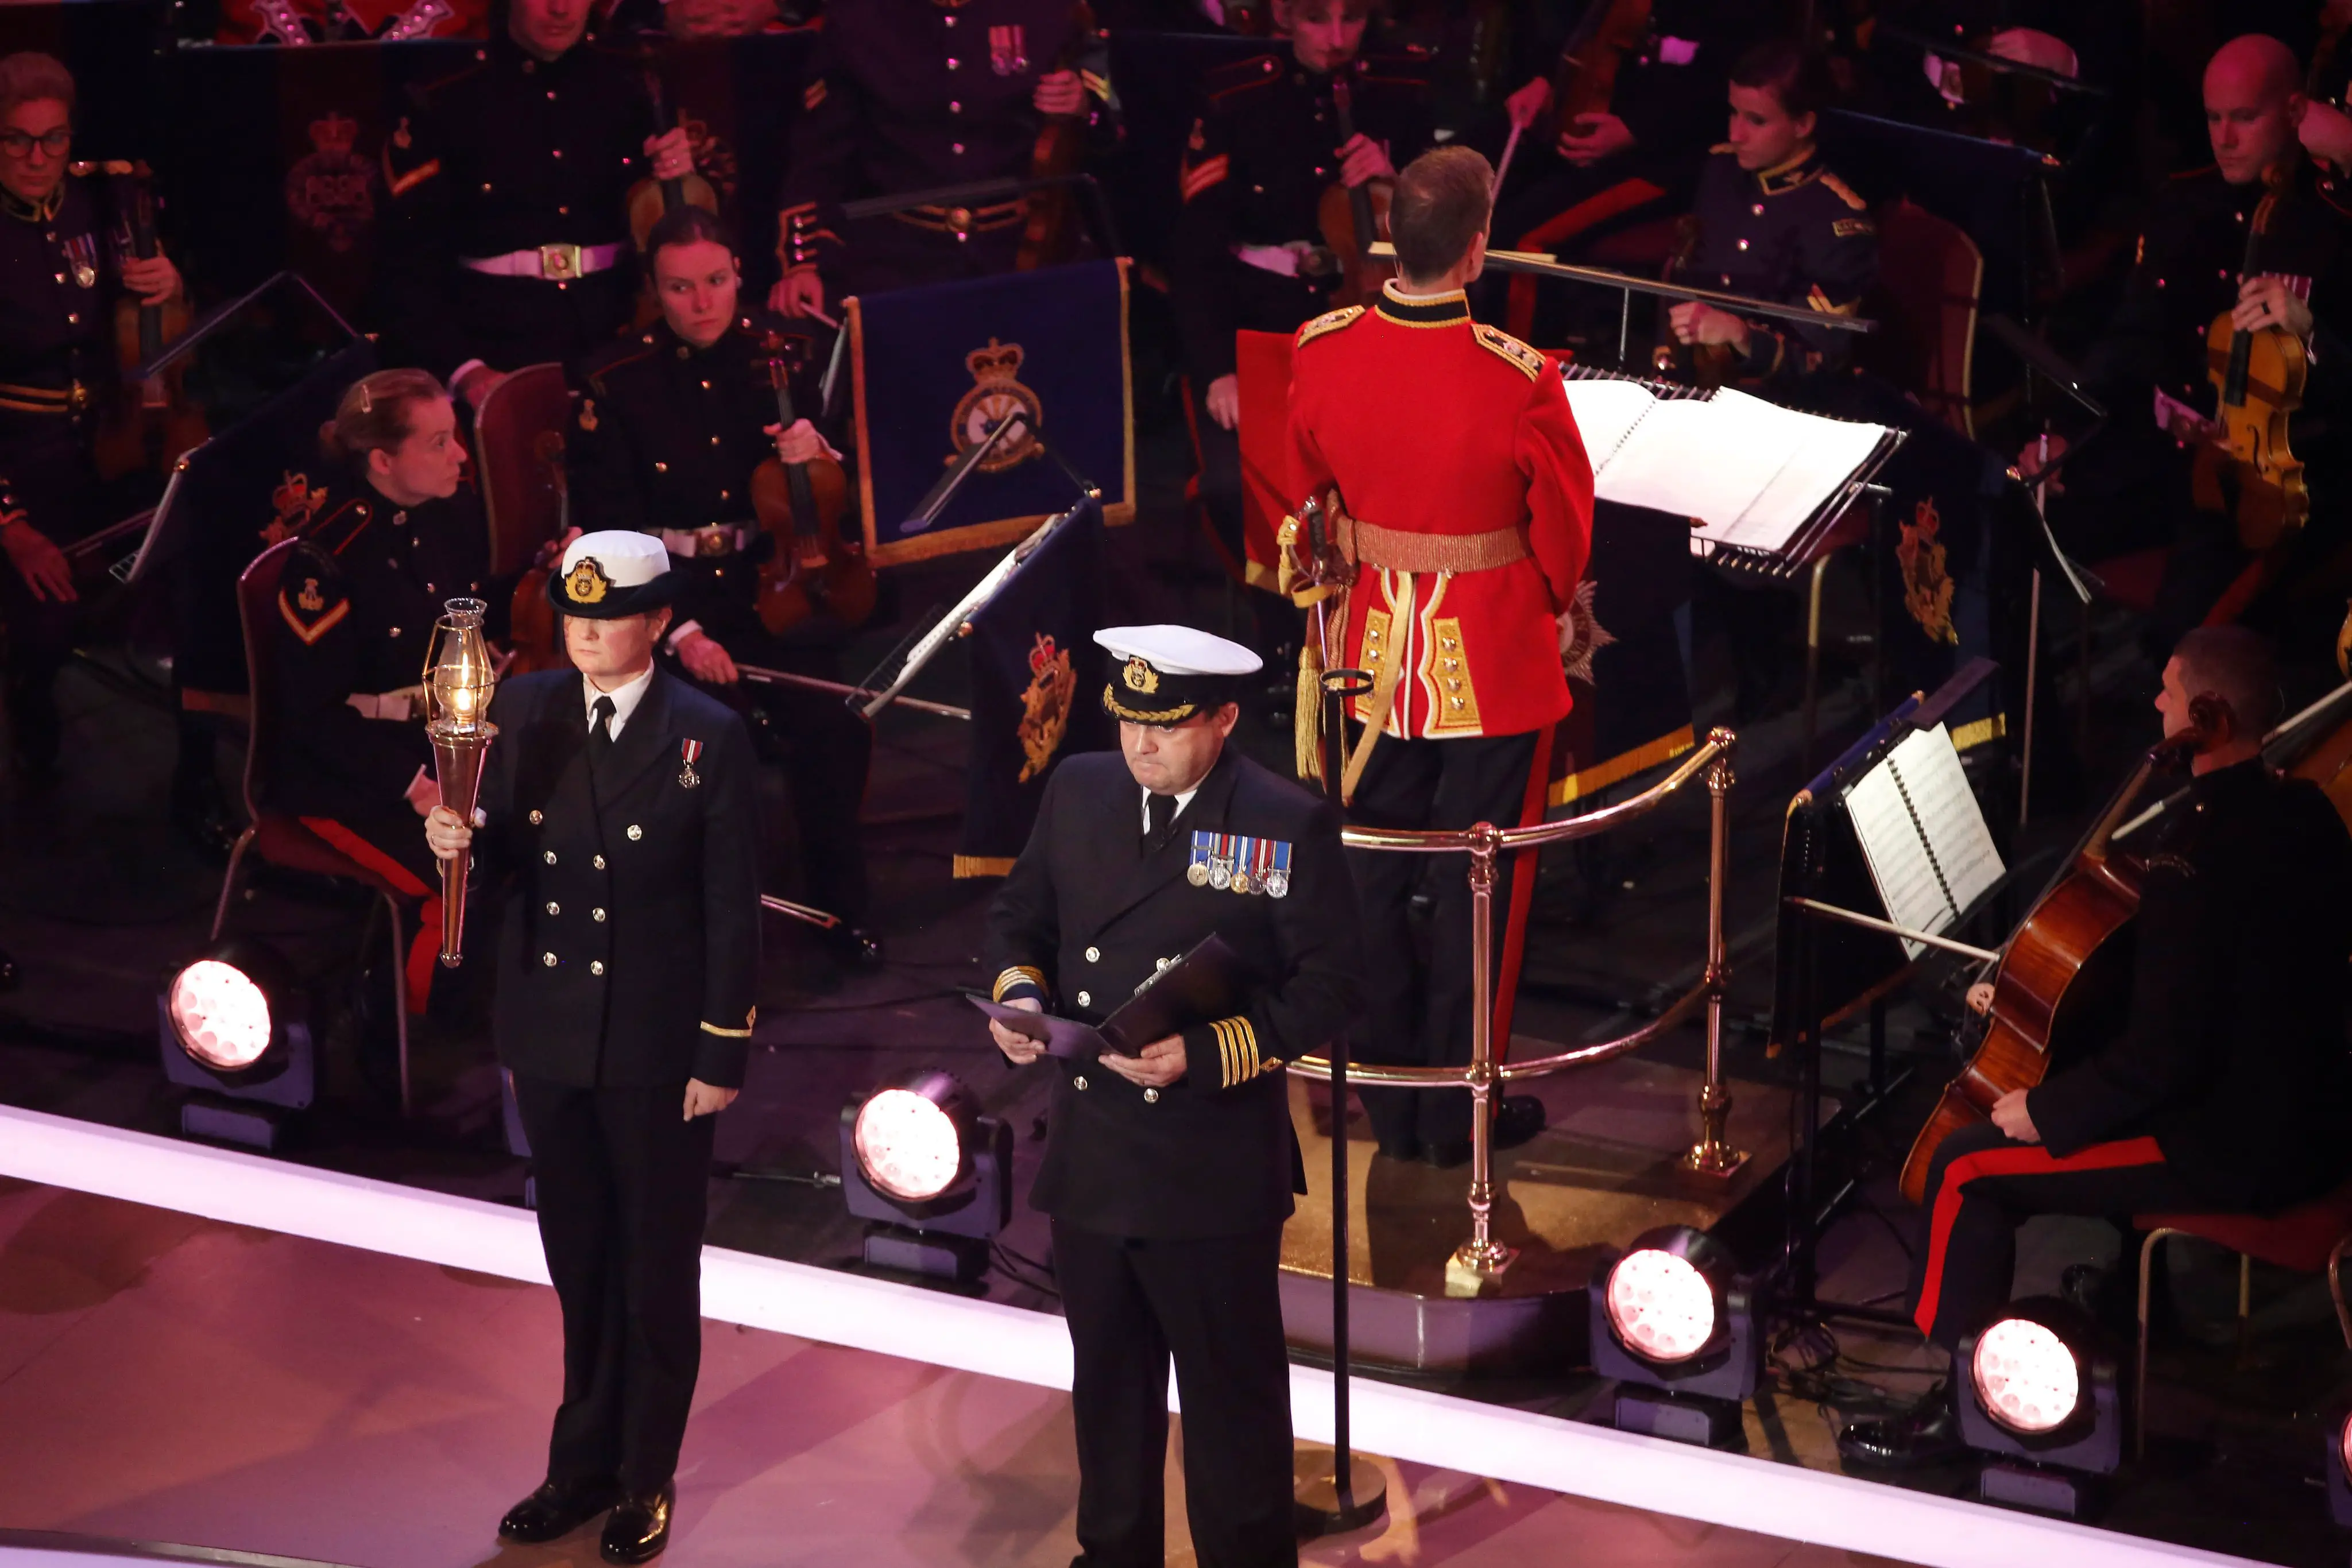 The Royal Festival of Remembrance is an annual event held every year in November before Remembrance Sunday